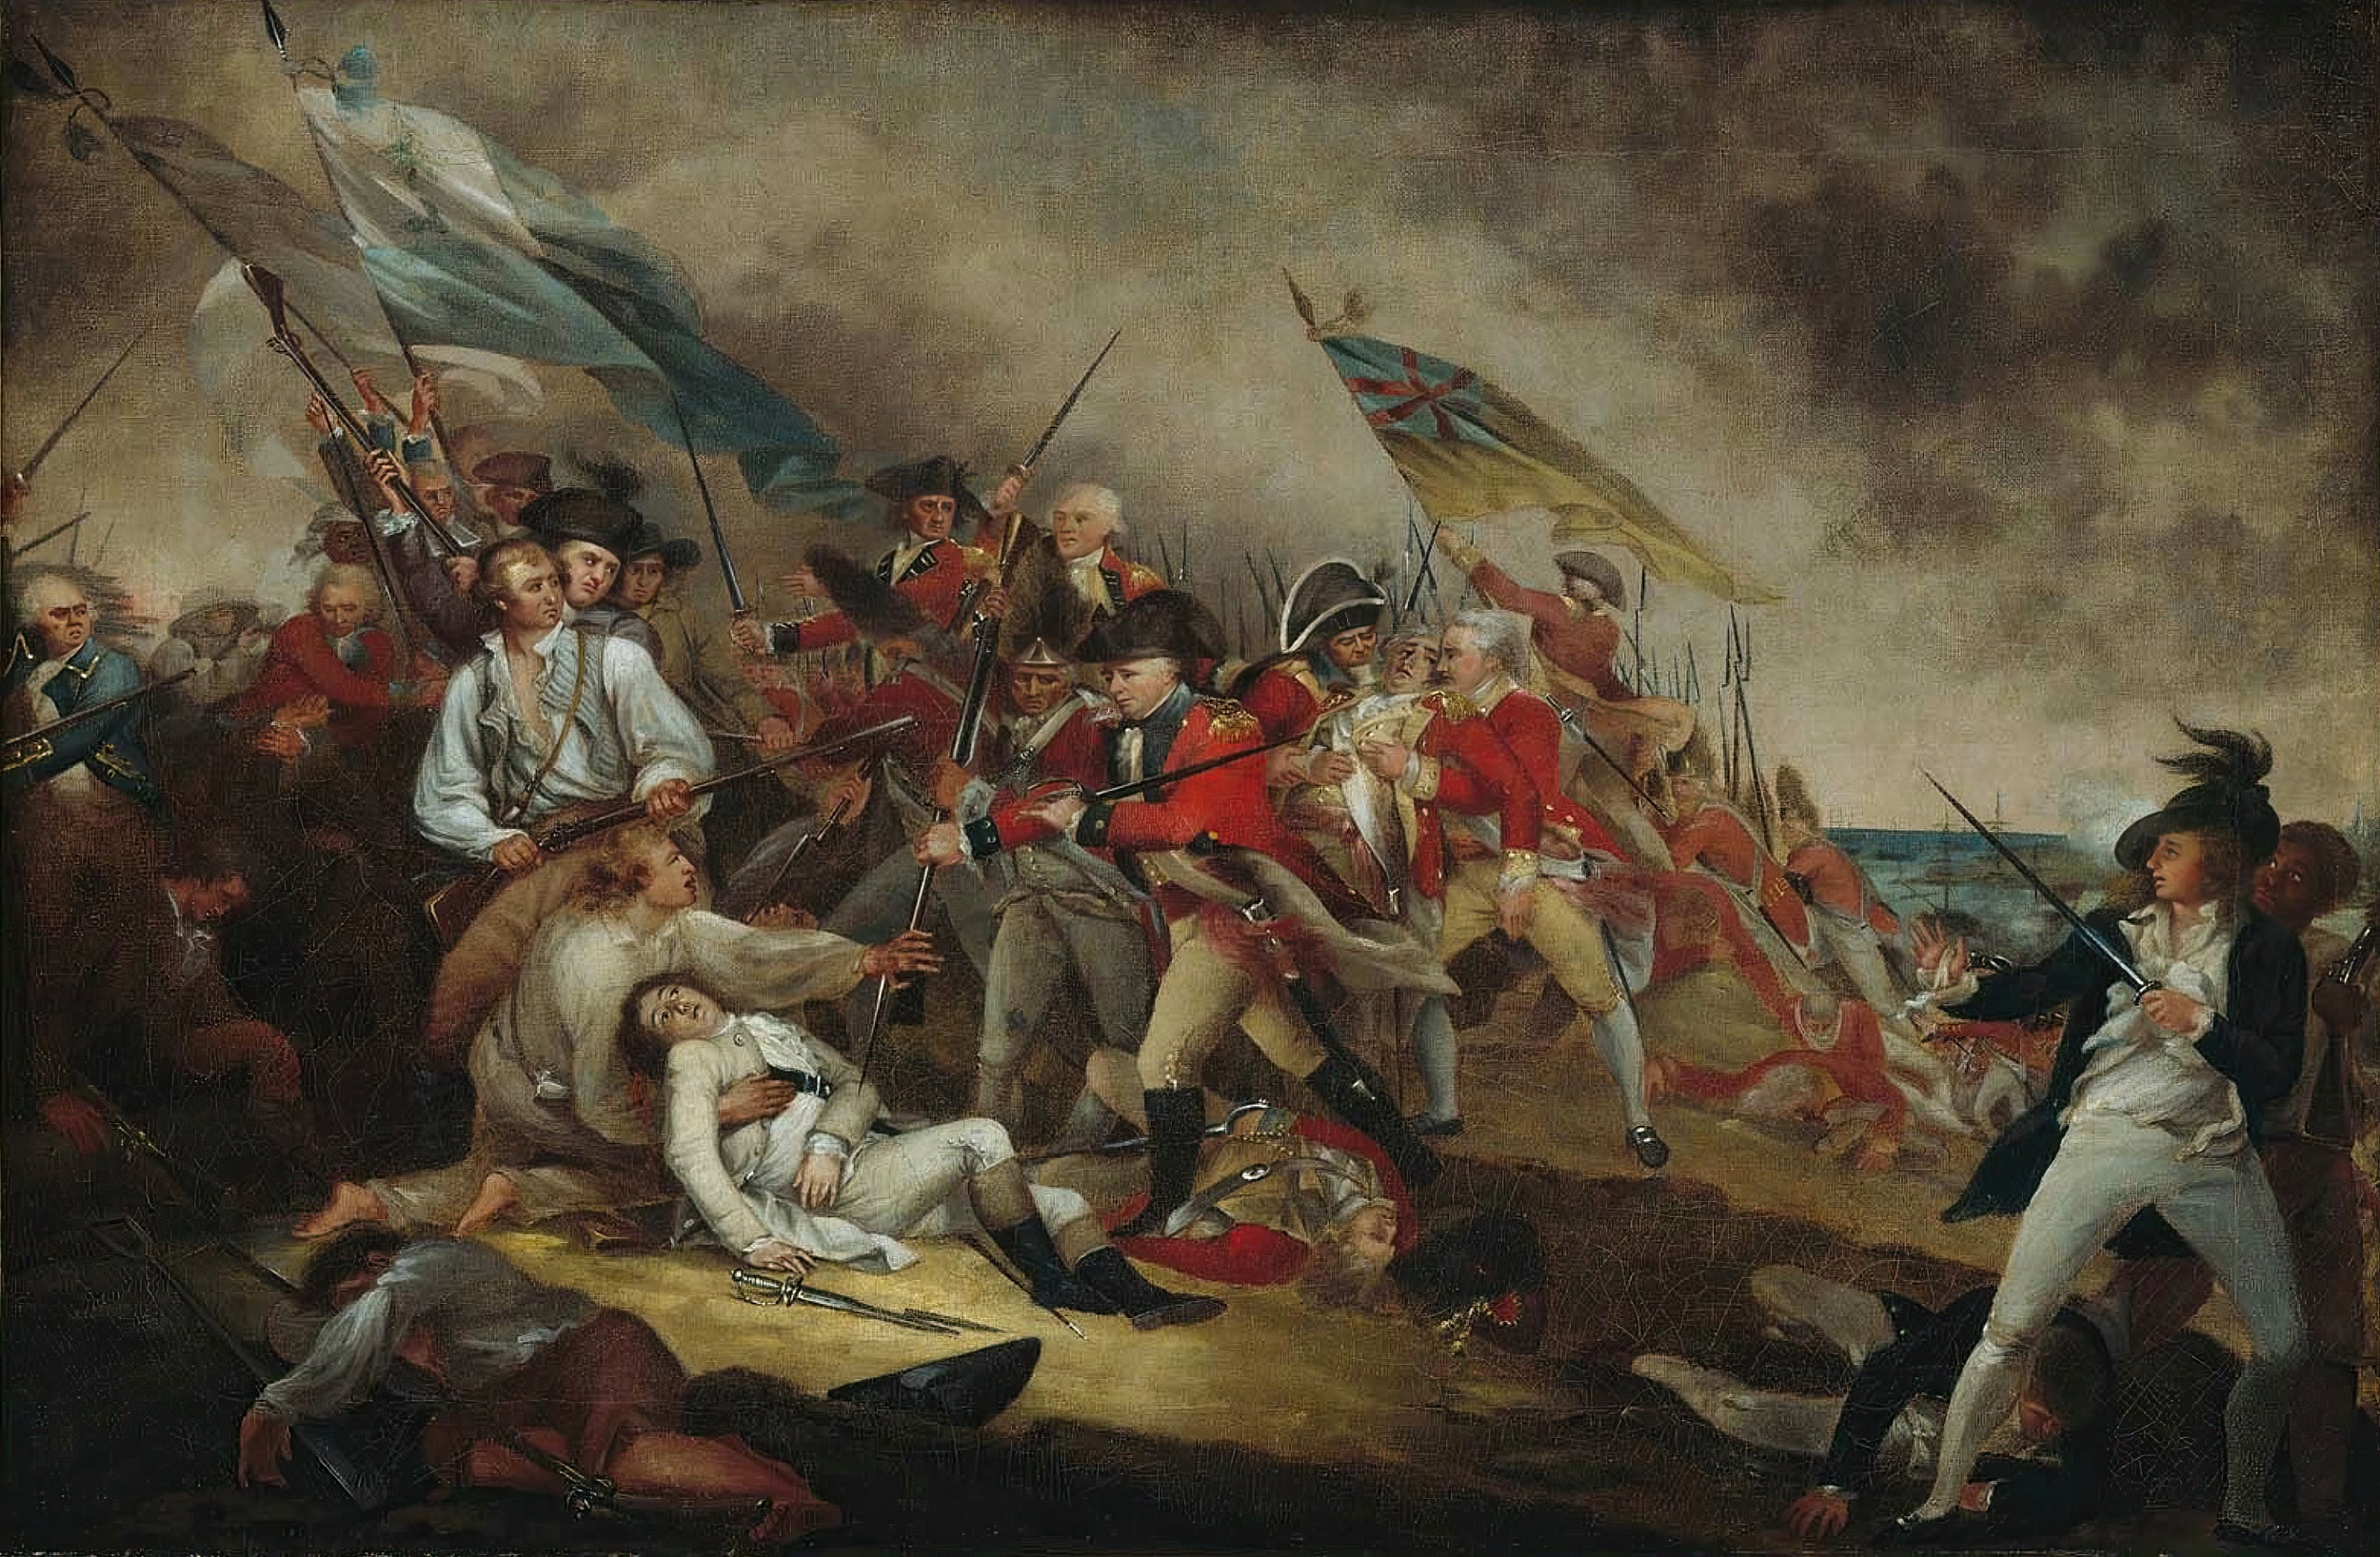 The Death of General Warren at the Battle of Bunker Hill, June 17, 1776 (Painting)